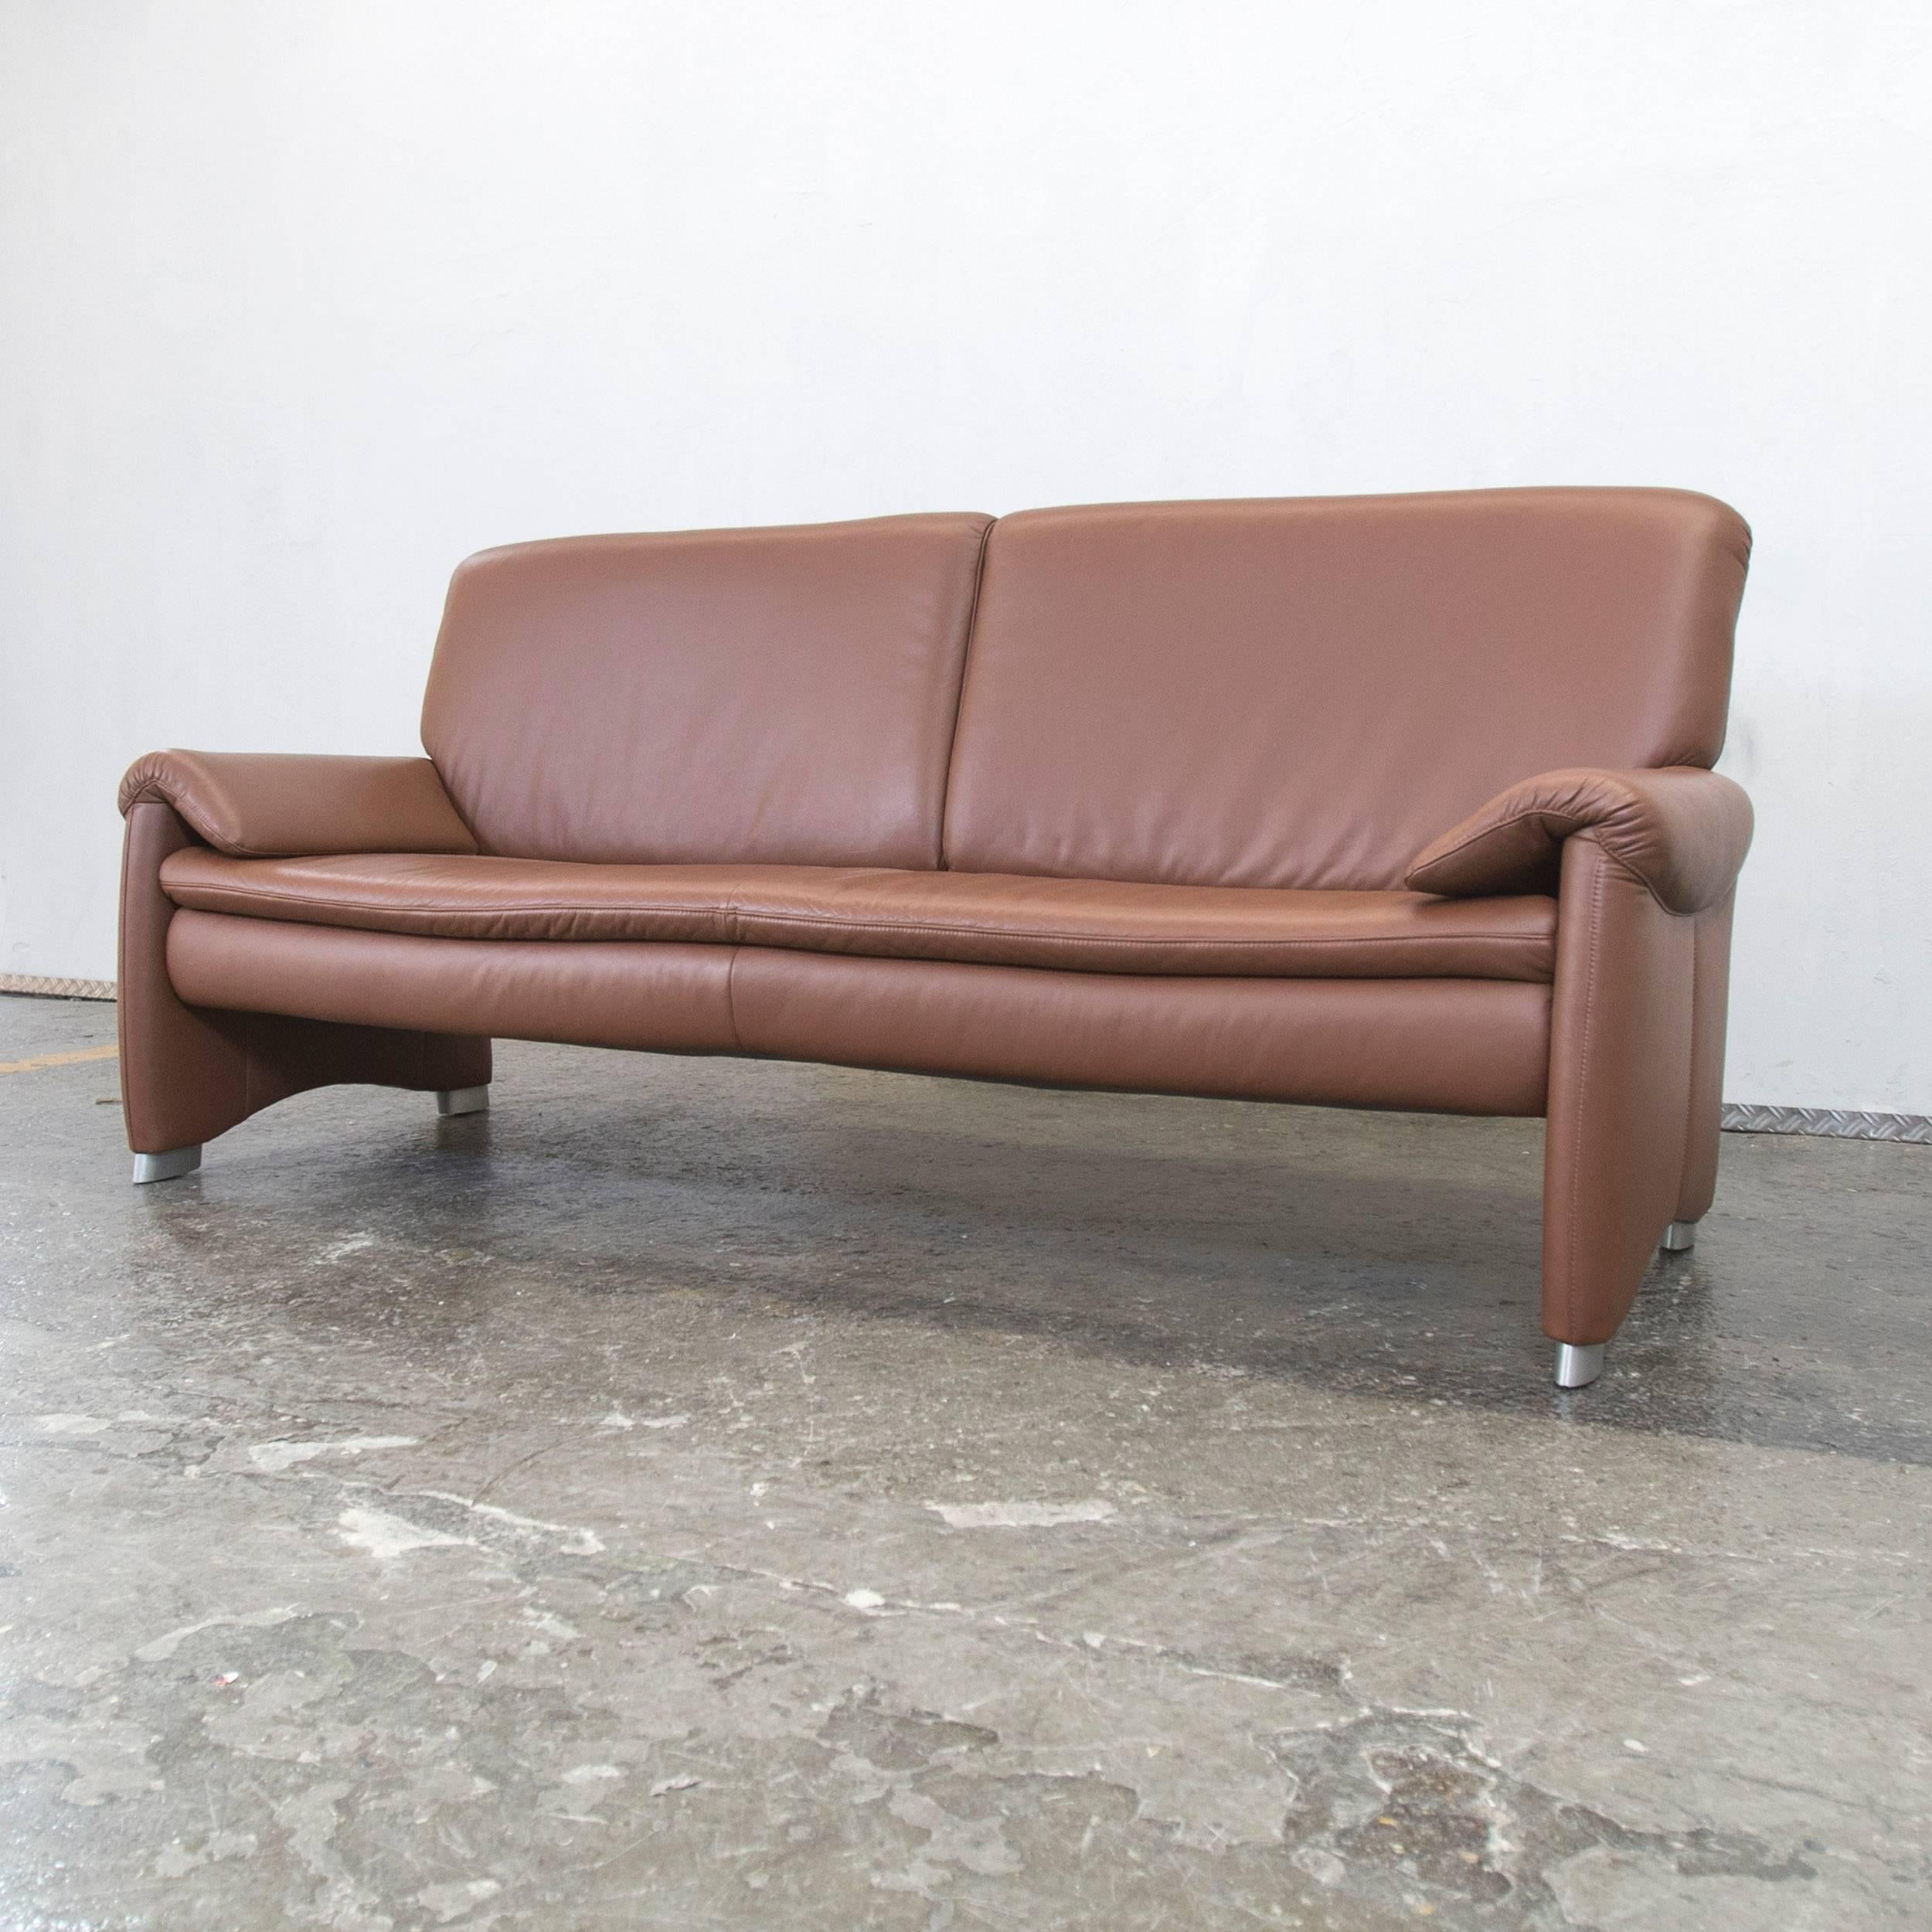 Brown colored Hülsta designer sofa with a modern style, designed for pure comfort.